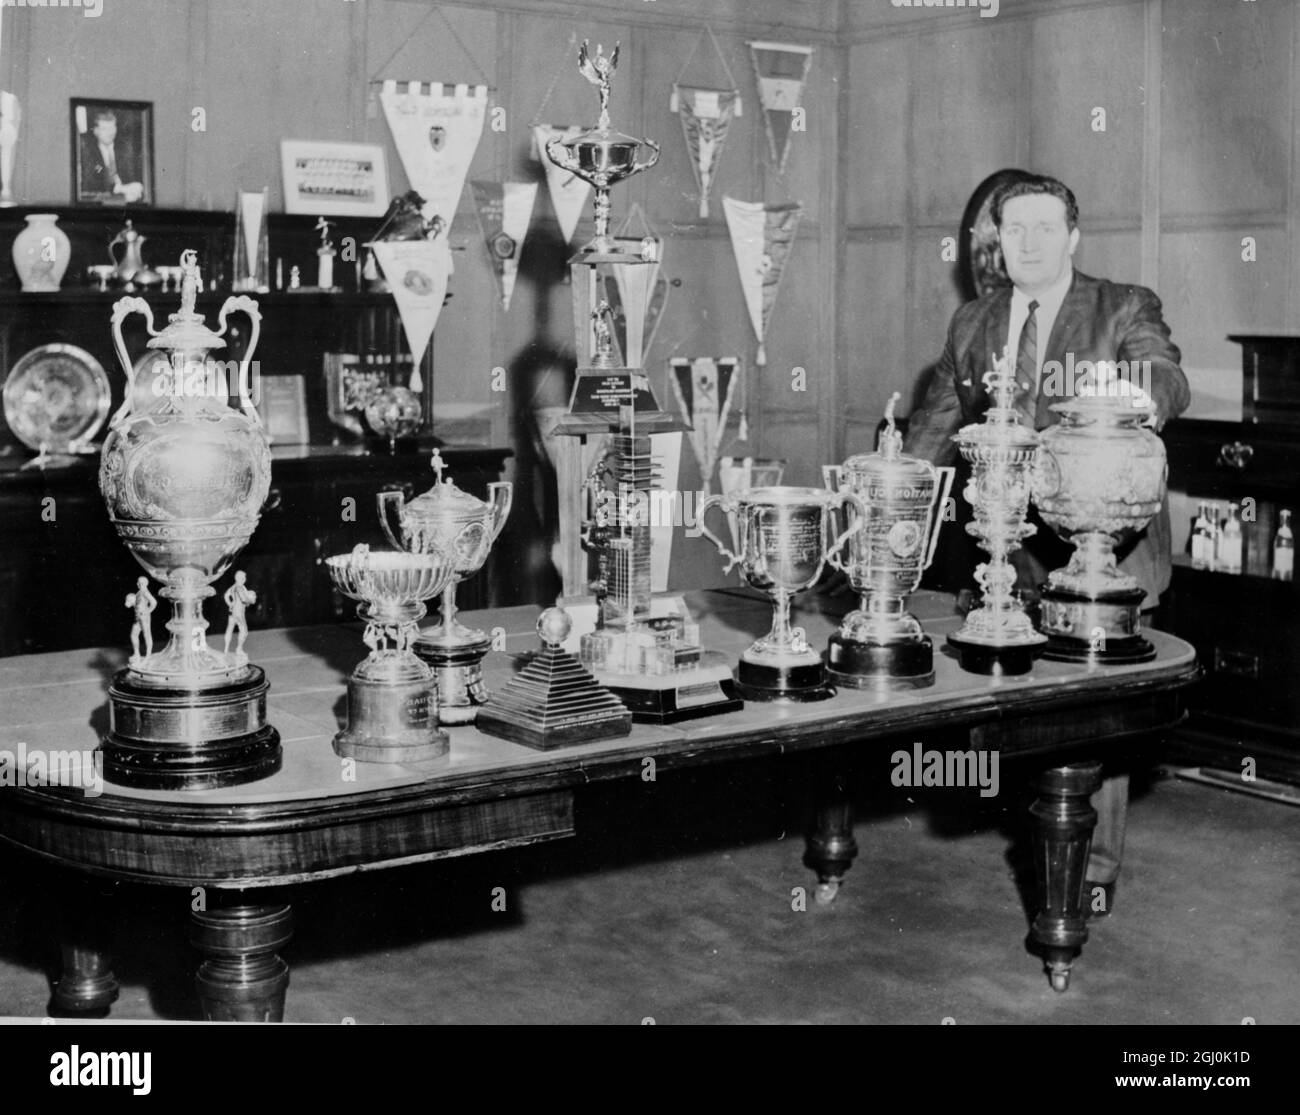 Glasgow: Mr J. Stein, Manager of the Scottish First Division Club and current League Leader, Celtic F.C., poses with some of the trophies won by his men. The Trophies seen left to right are : Ibrox Disaster Trophy; St Mungo Cup; Coronation Cup, Victory in Europe Cup; Empire Cup; Valencia trophy; Glasgow Cup. Tall trophy in the rear is the American Tour Cup. 20 January 1967 Stock Photo